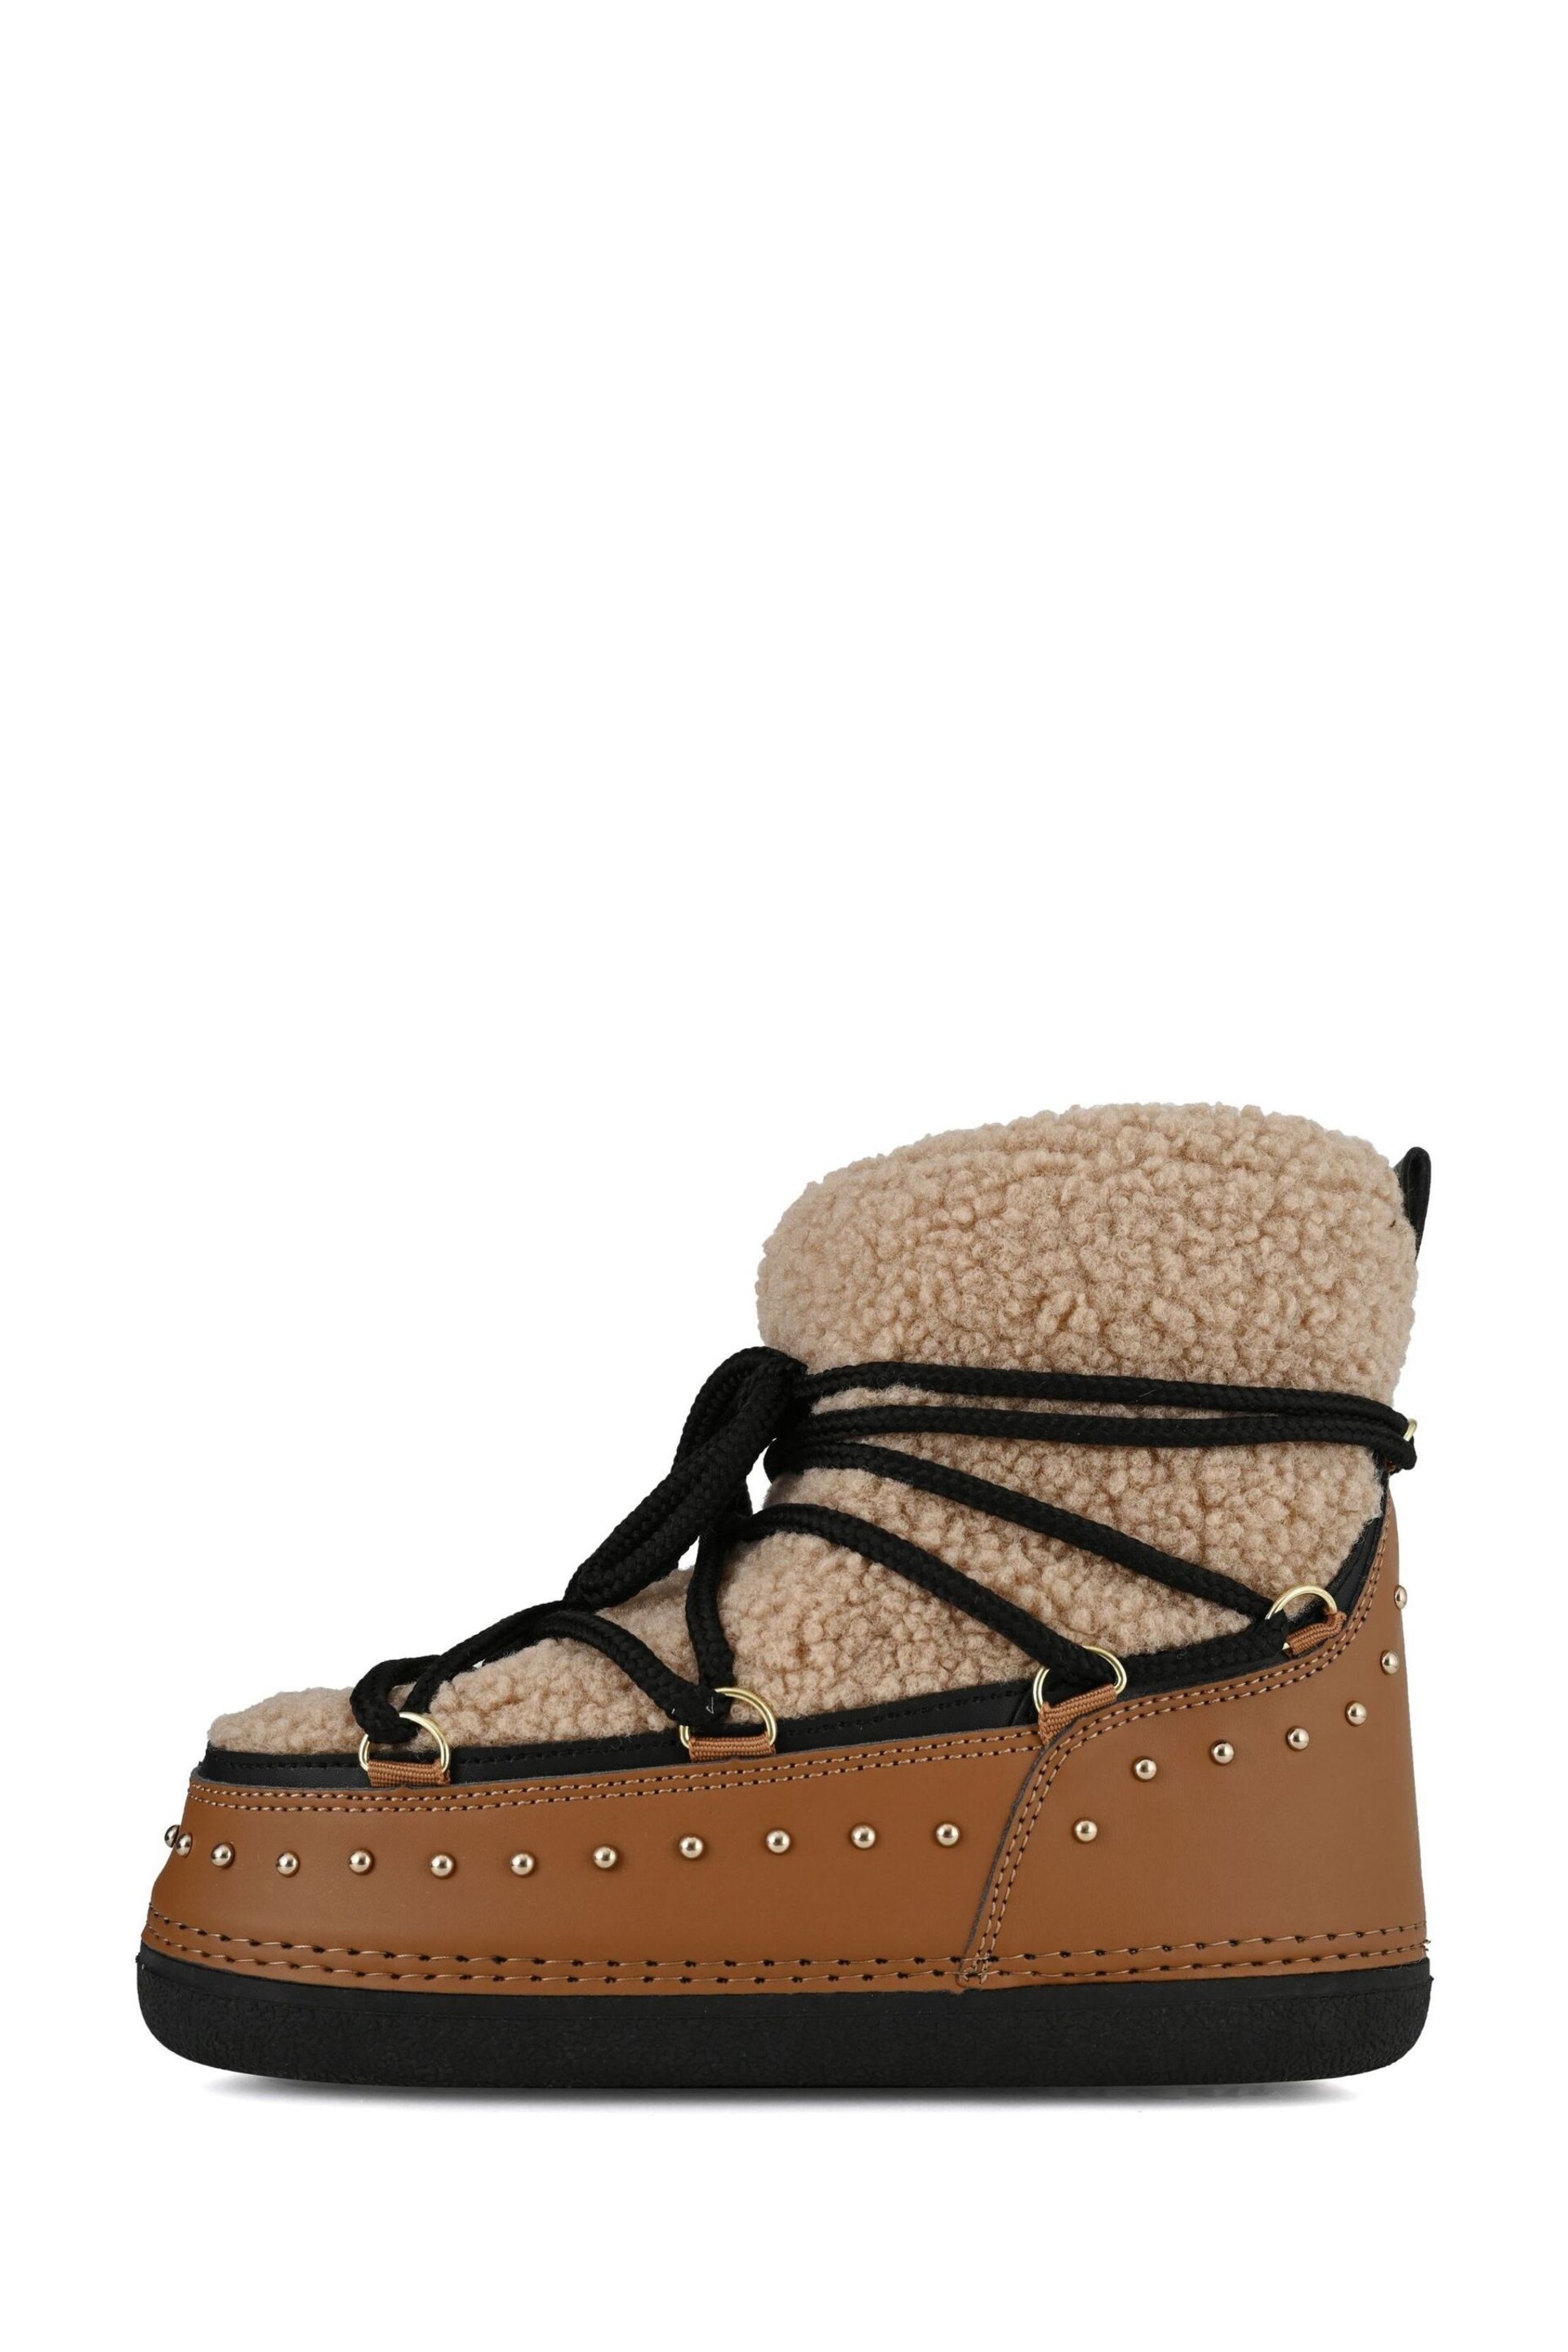 South Beach Natural Borg Snow Boots With Stud Detail - Image 3 of 4